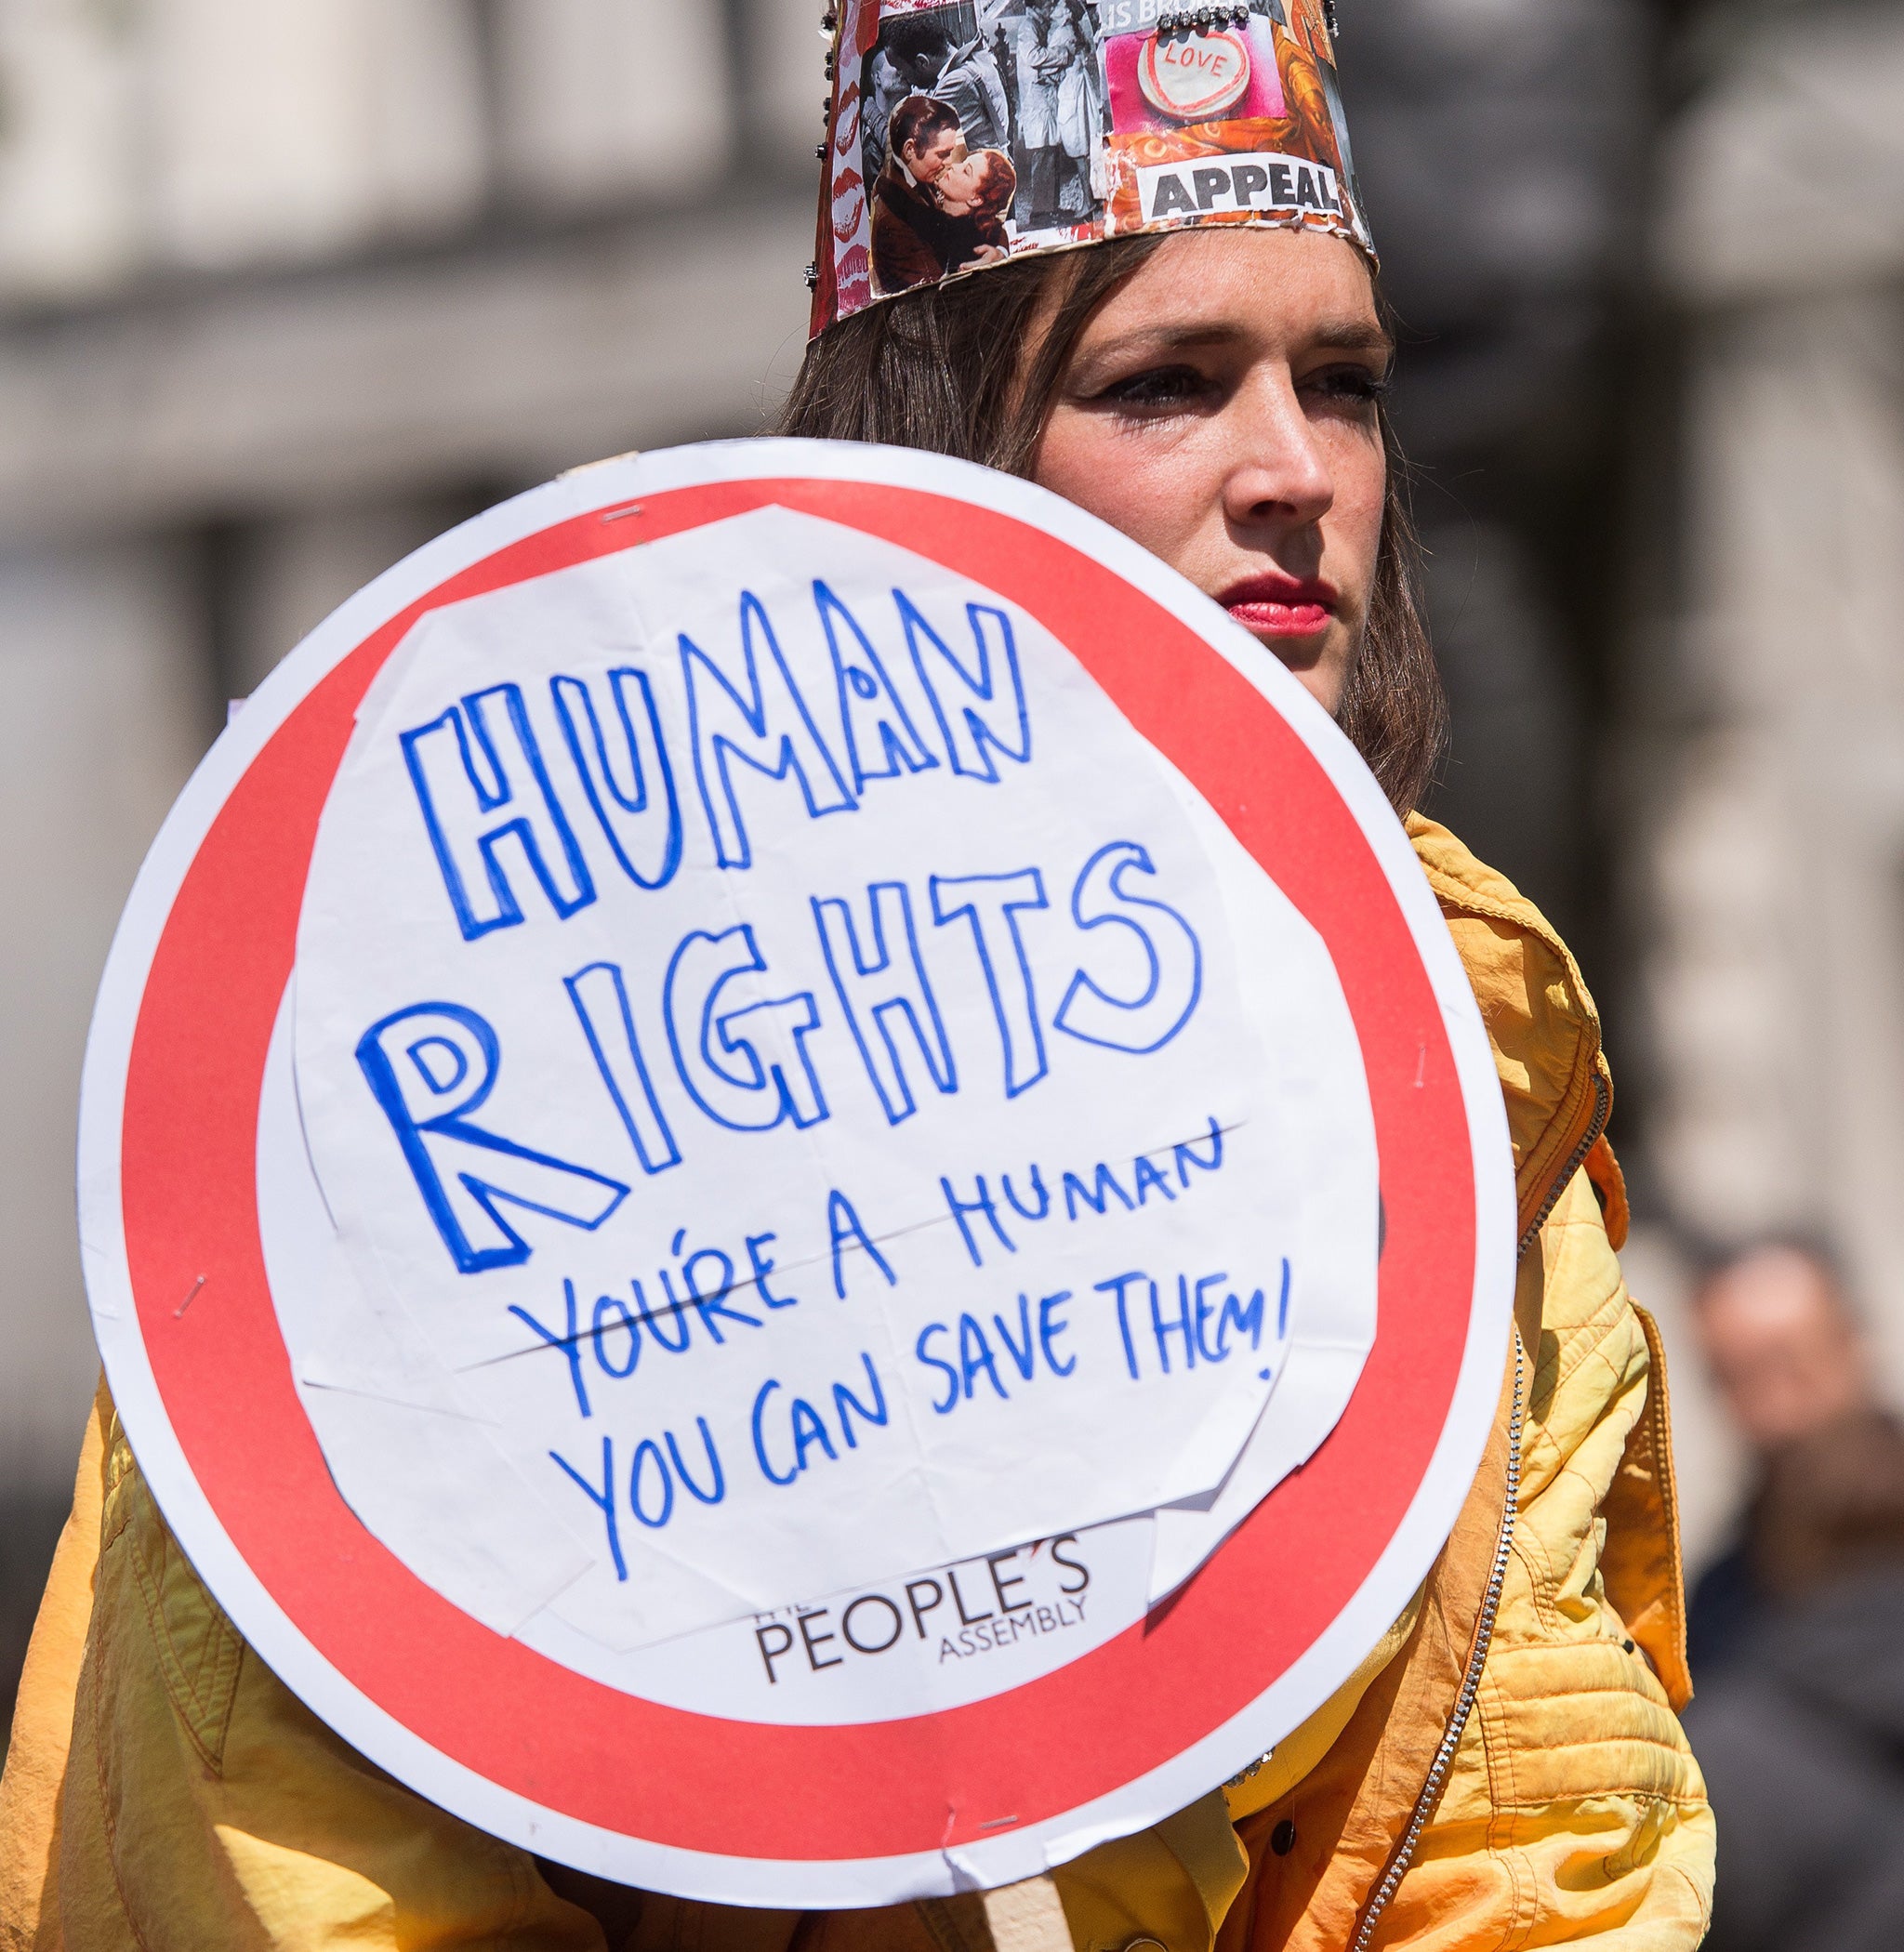 A woman wears a decorated crown as she takes part in a human rights protest in central London